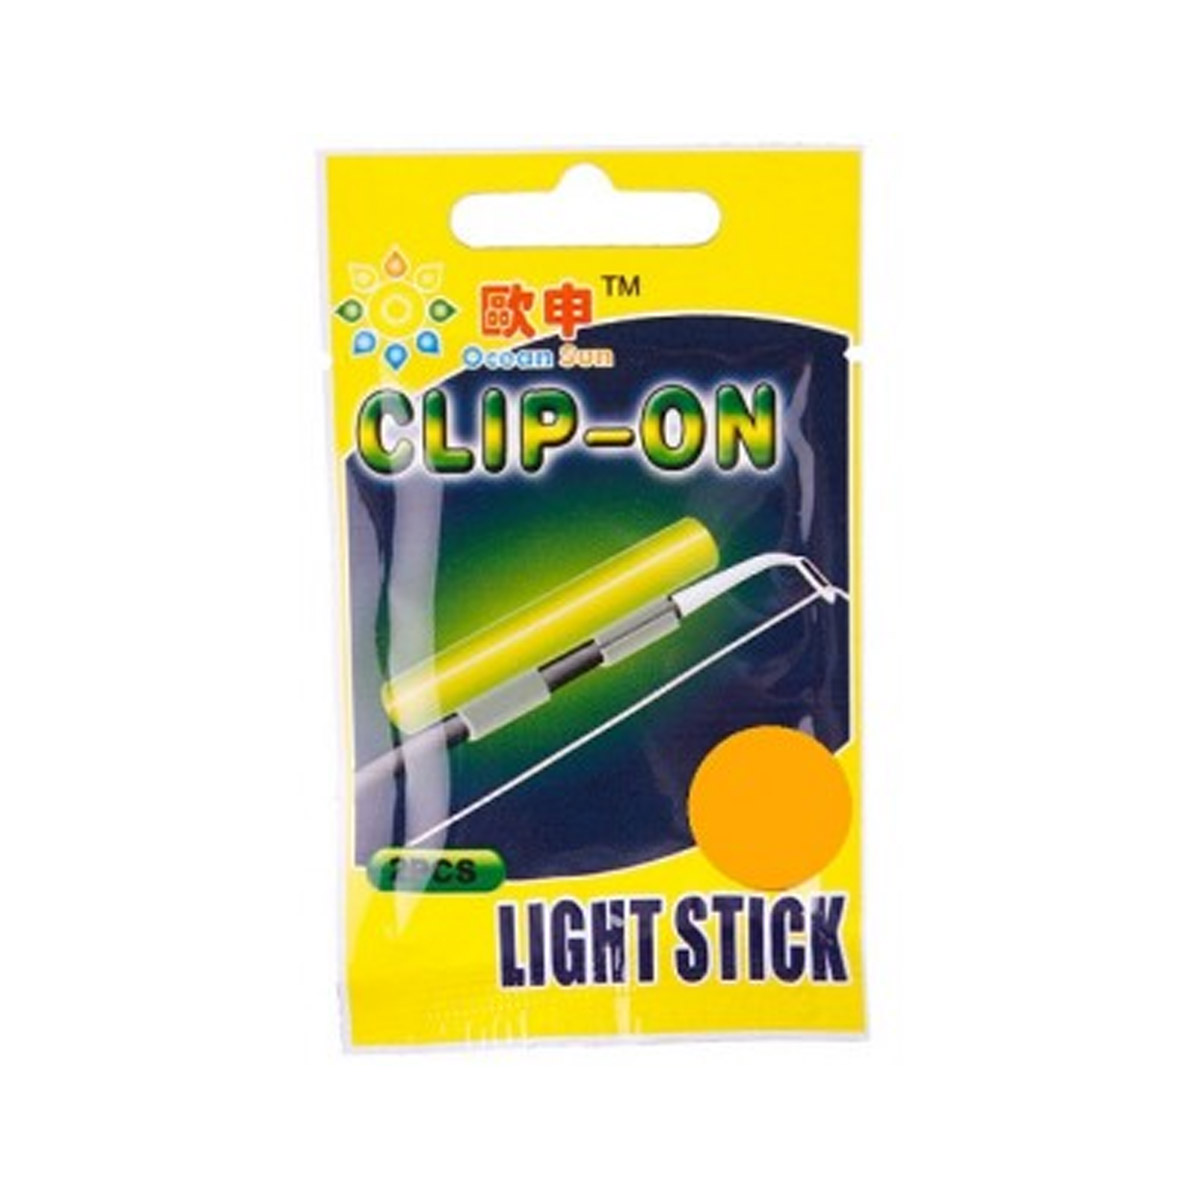 Chemical Clip On Powerlight 0,6 tot 1,4mm